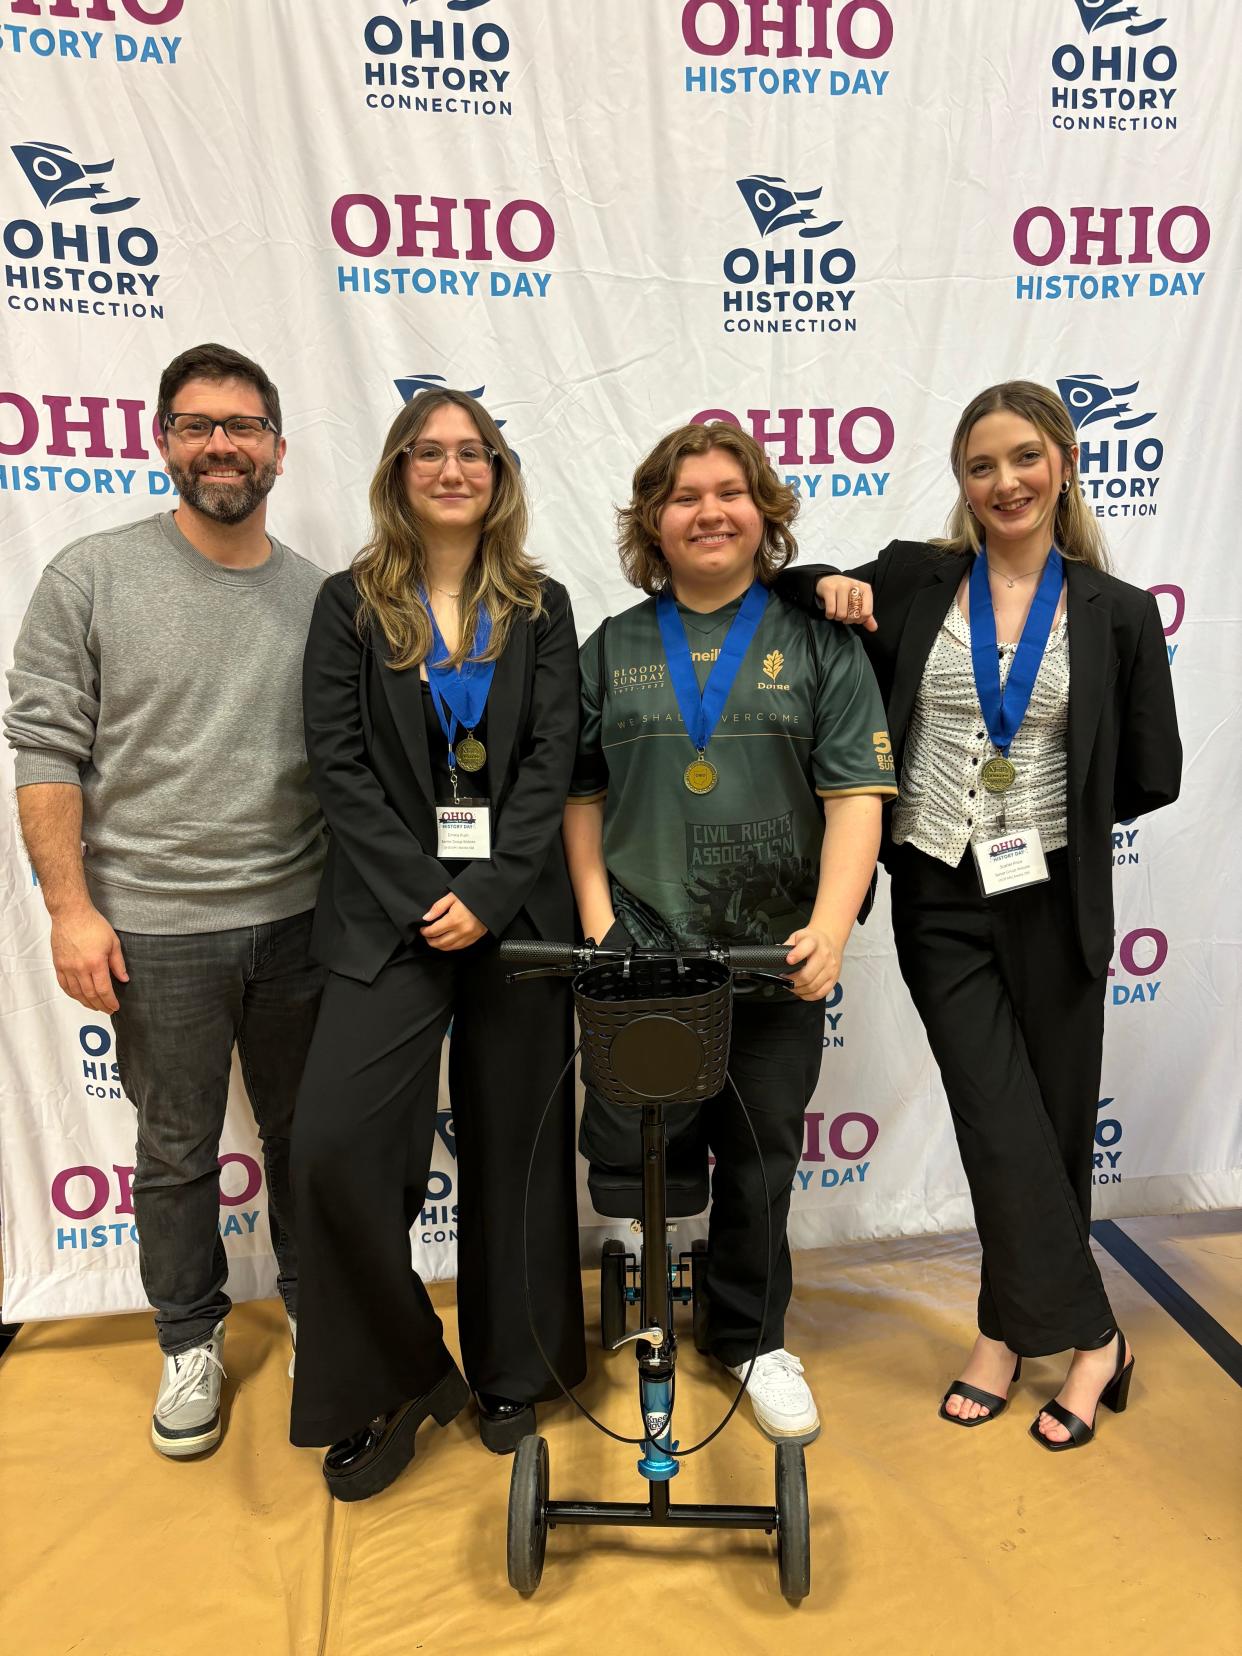 Maysville High School History teacher Lance McGee, from left, is shown with Emma Rush, Will Stoepfel and Scarlet Price. All three students qualified for the 2024 National History Day national competition held at the University of Maryland this year.